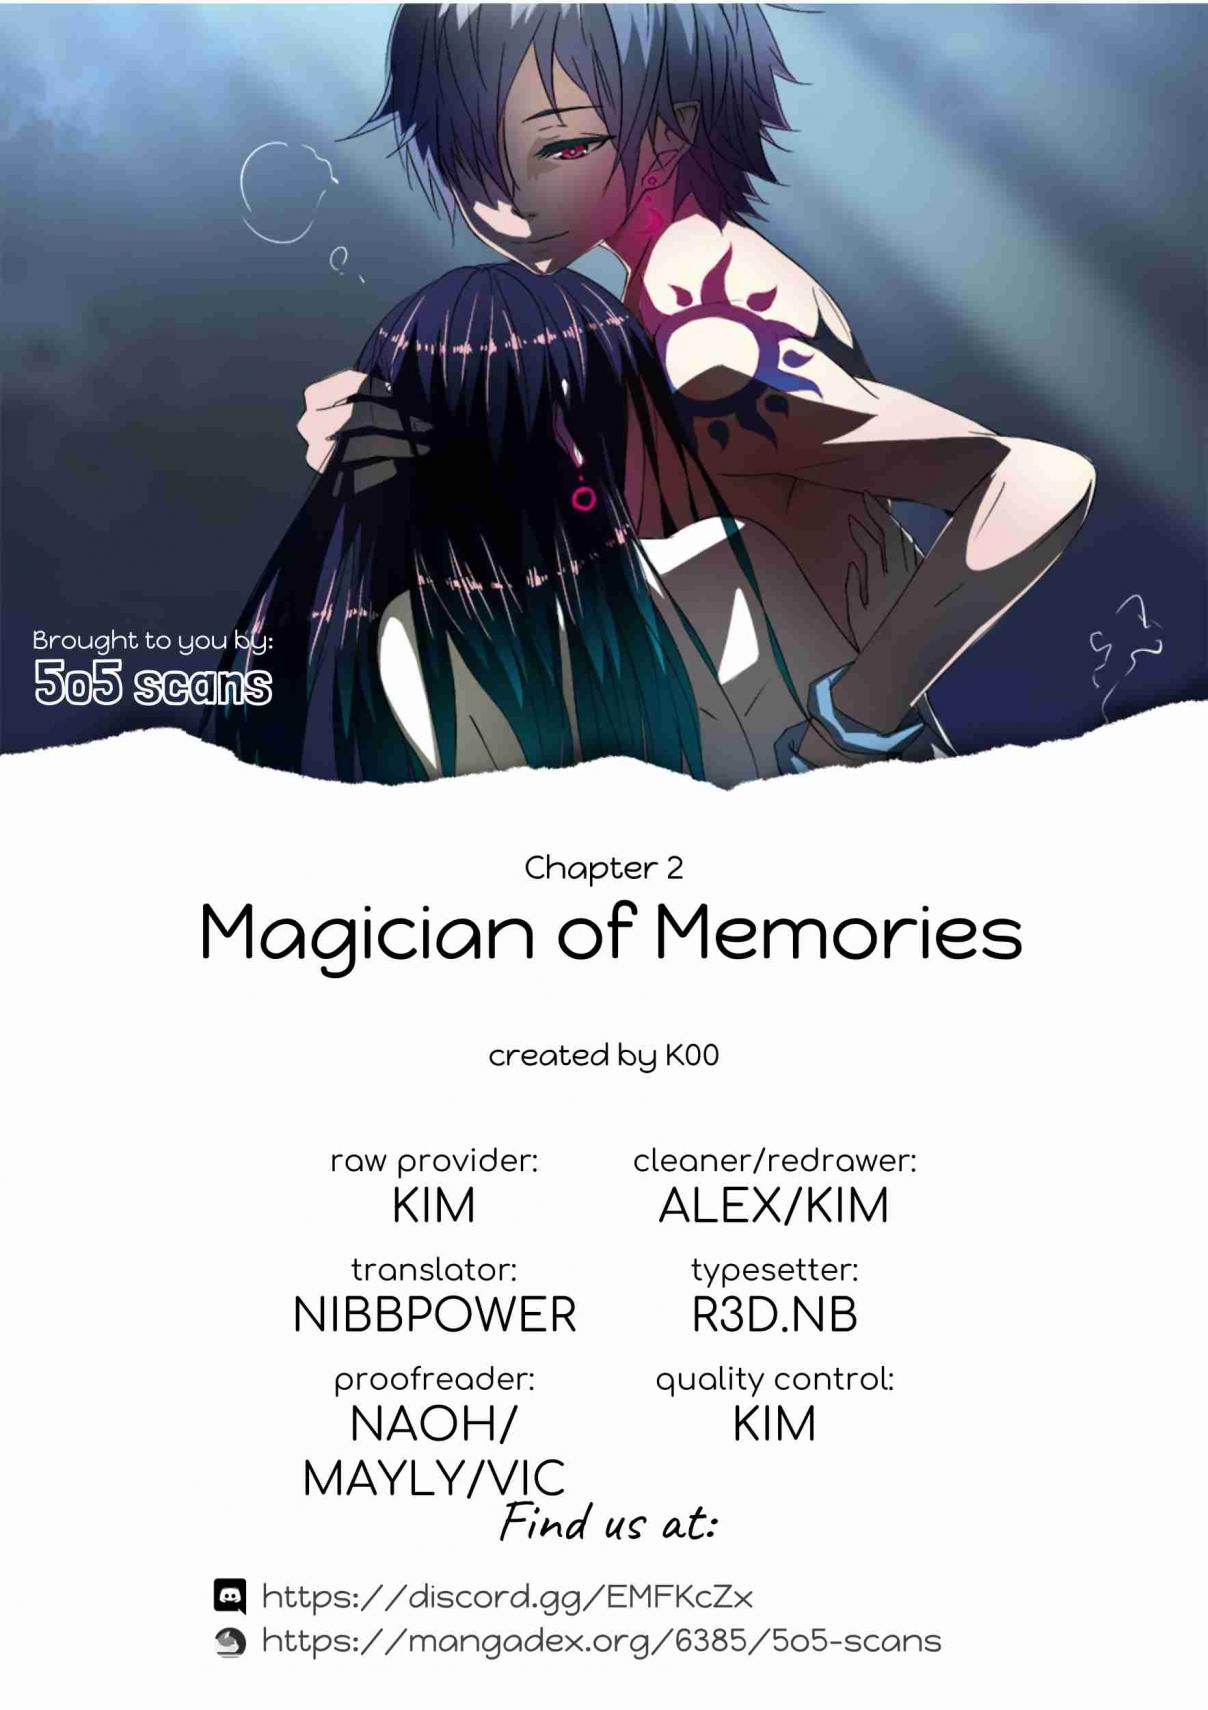 Magician of Memories Ch. 3 Eavesdropping Spell